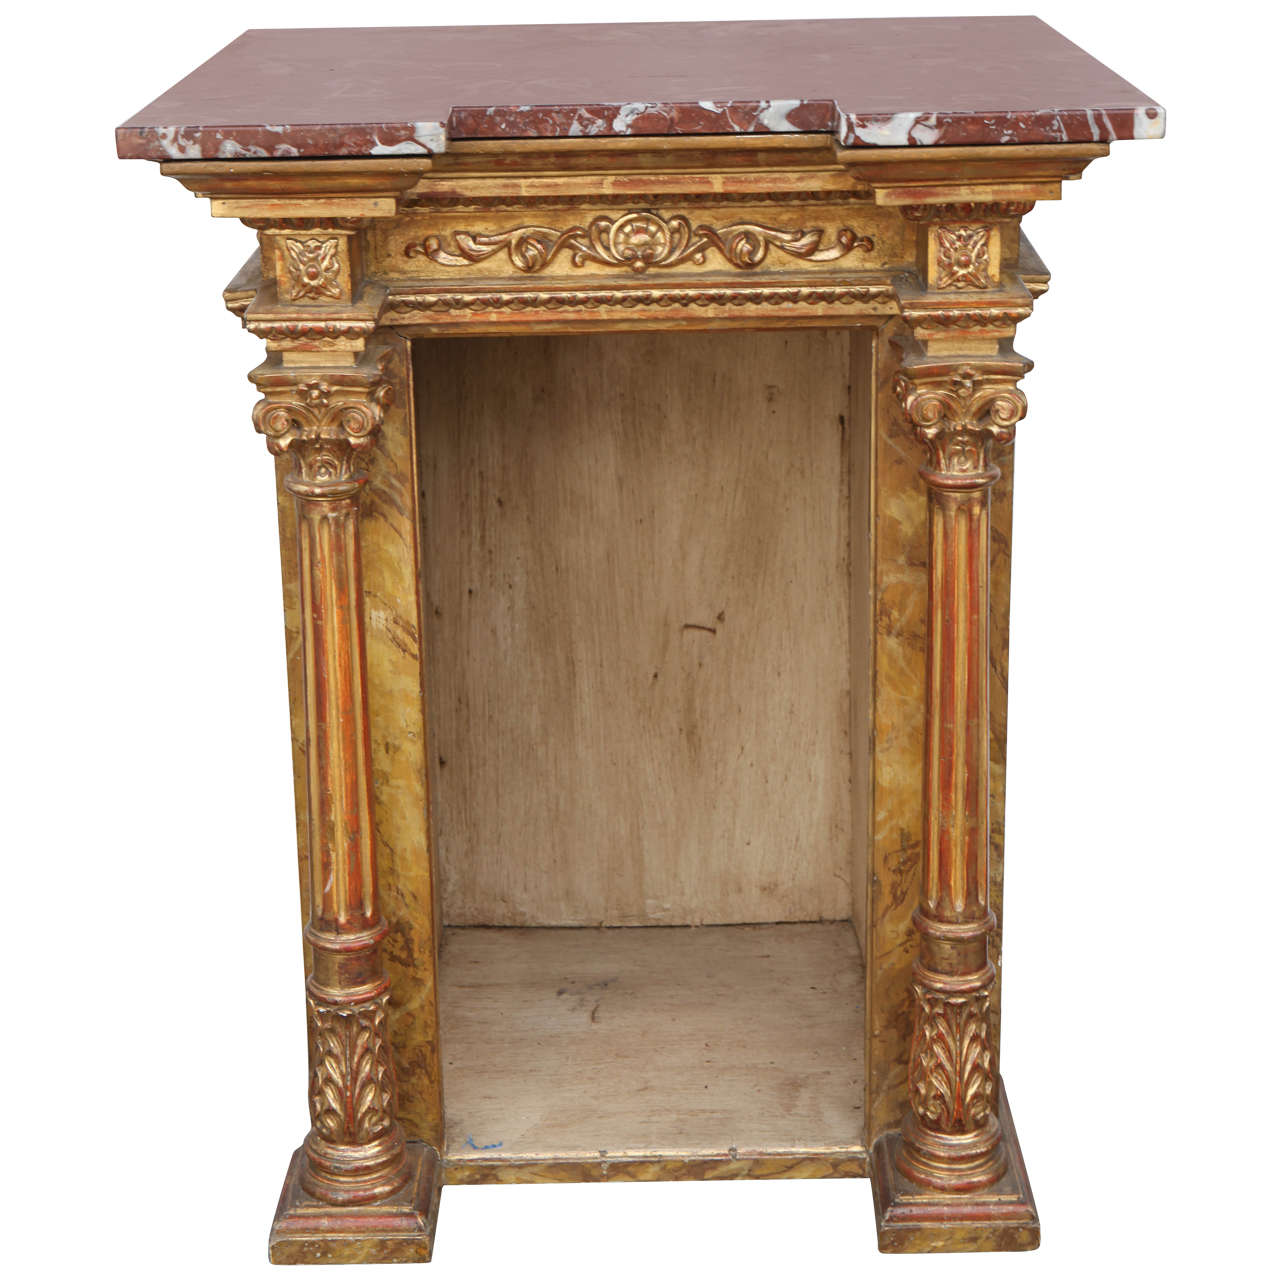 19th Century Italian Giltwood Display Table with Marble Top